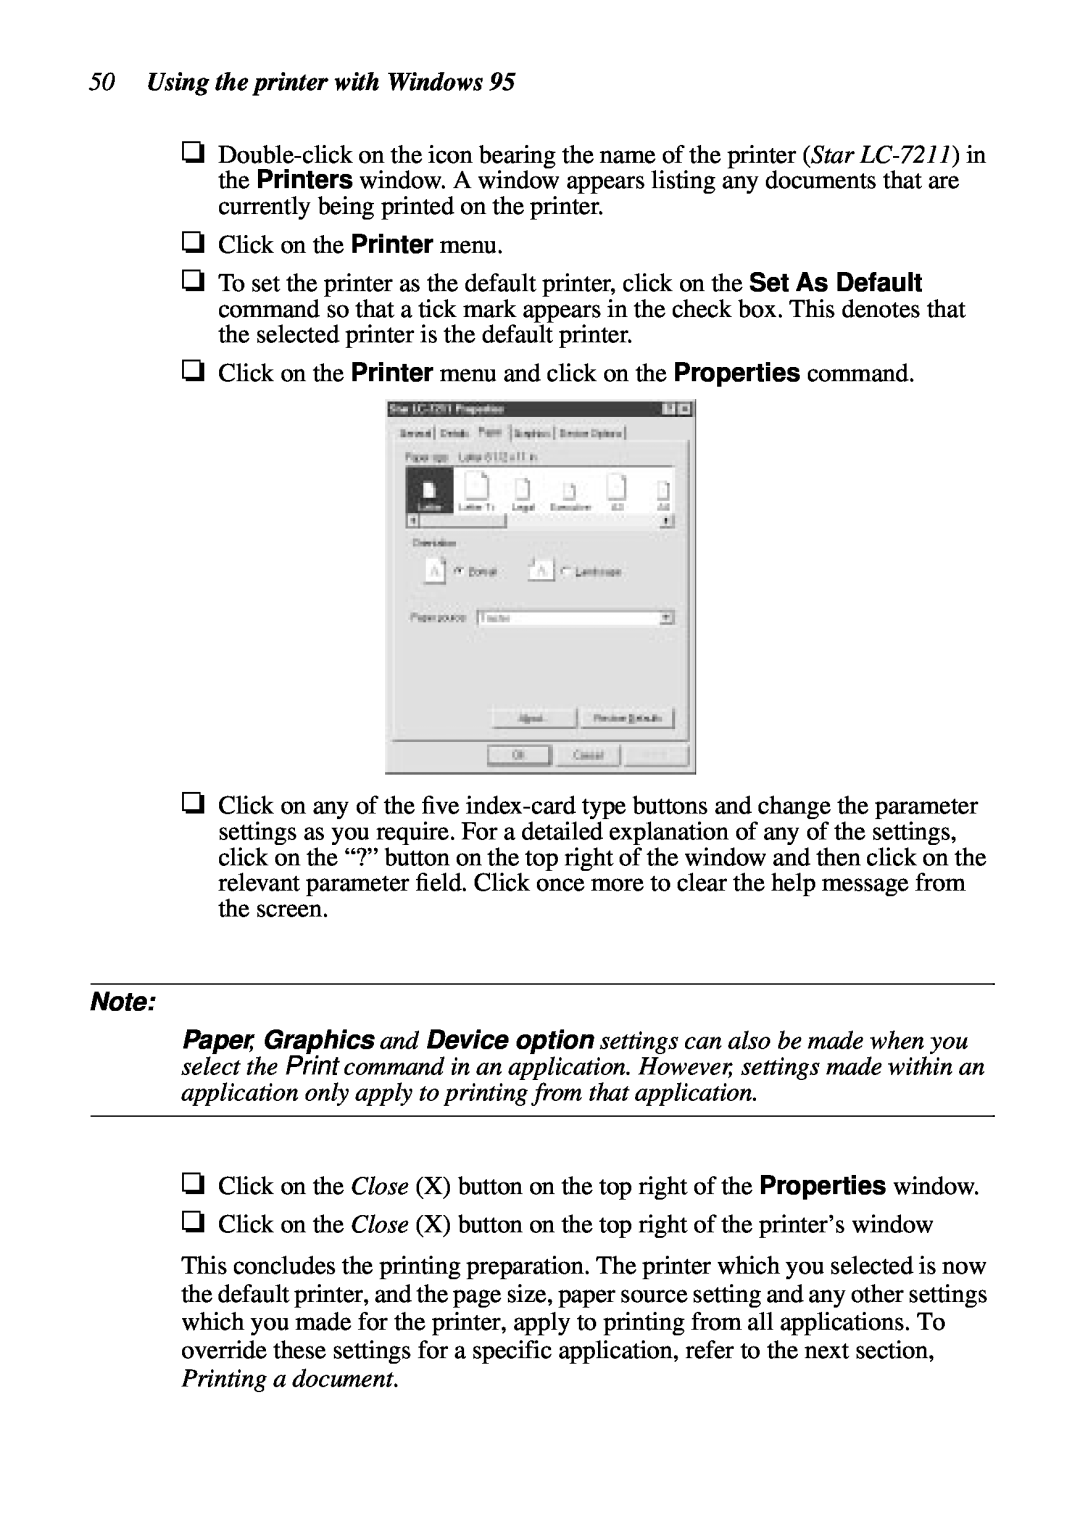 Star Micronics LC-7211 user manual Using the printer with Windows, Printing a document 